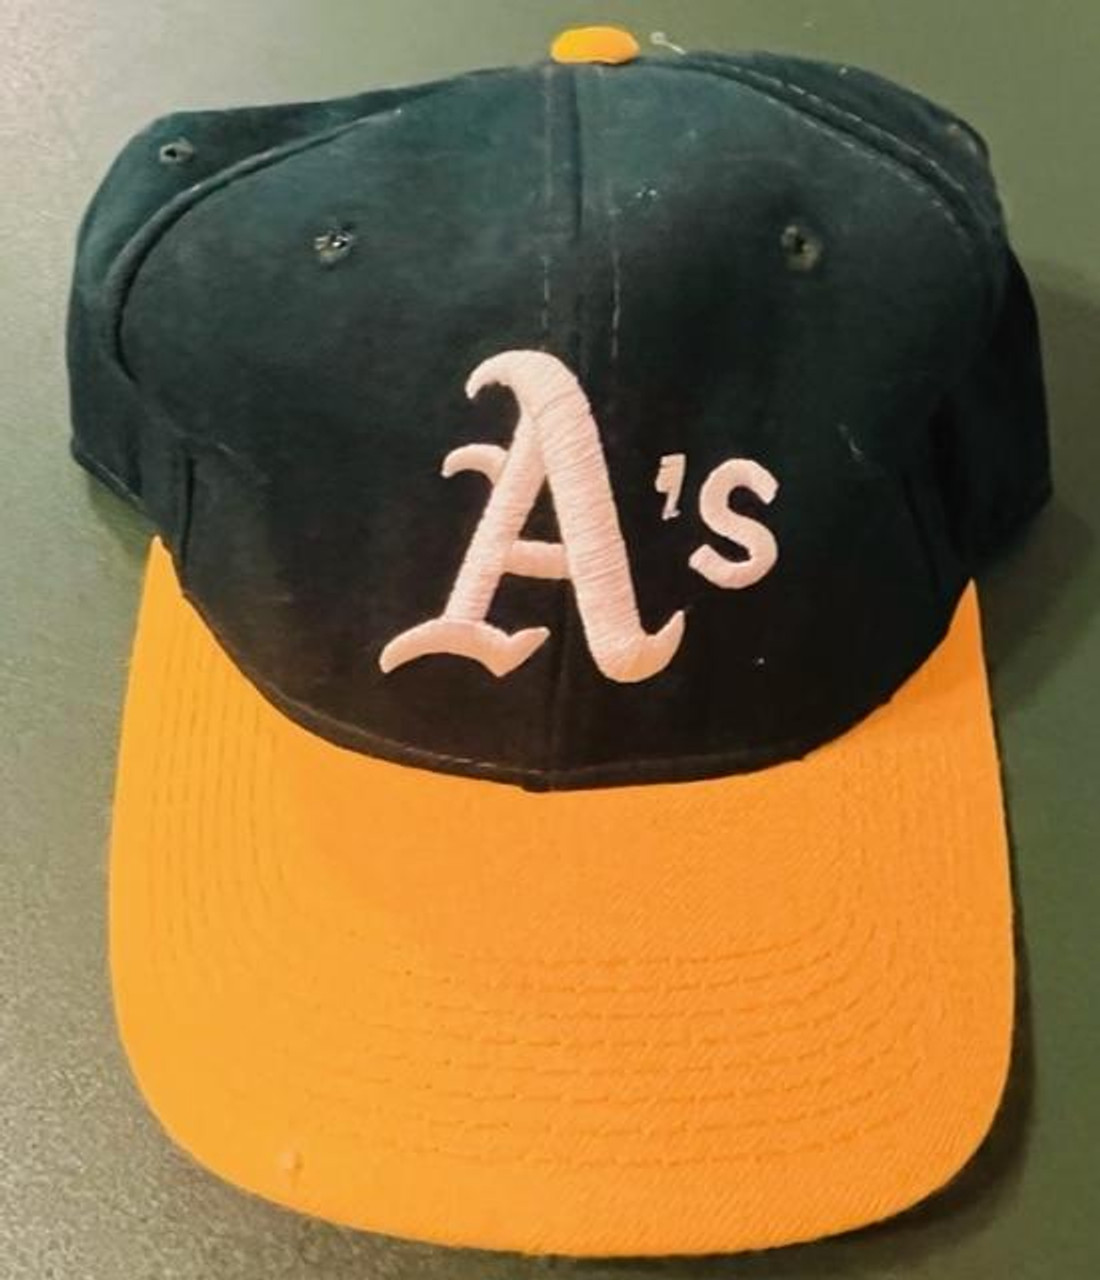 https://cdn11.bigcommerce.com/s-w9zxkxiqo6/images/stencil/1280x1280/products/2581/9723/oakland-as-mlb-vintage-sports-specialties-fitted-hat-sports-specialties__11381.1646445883.jpg?c=1